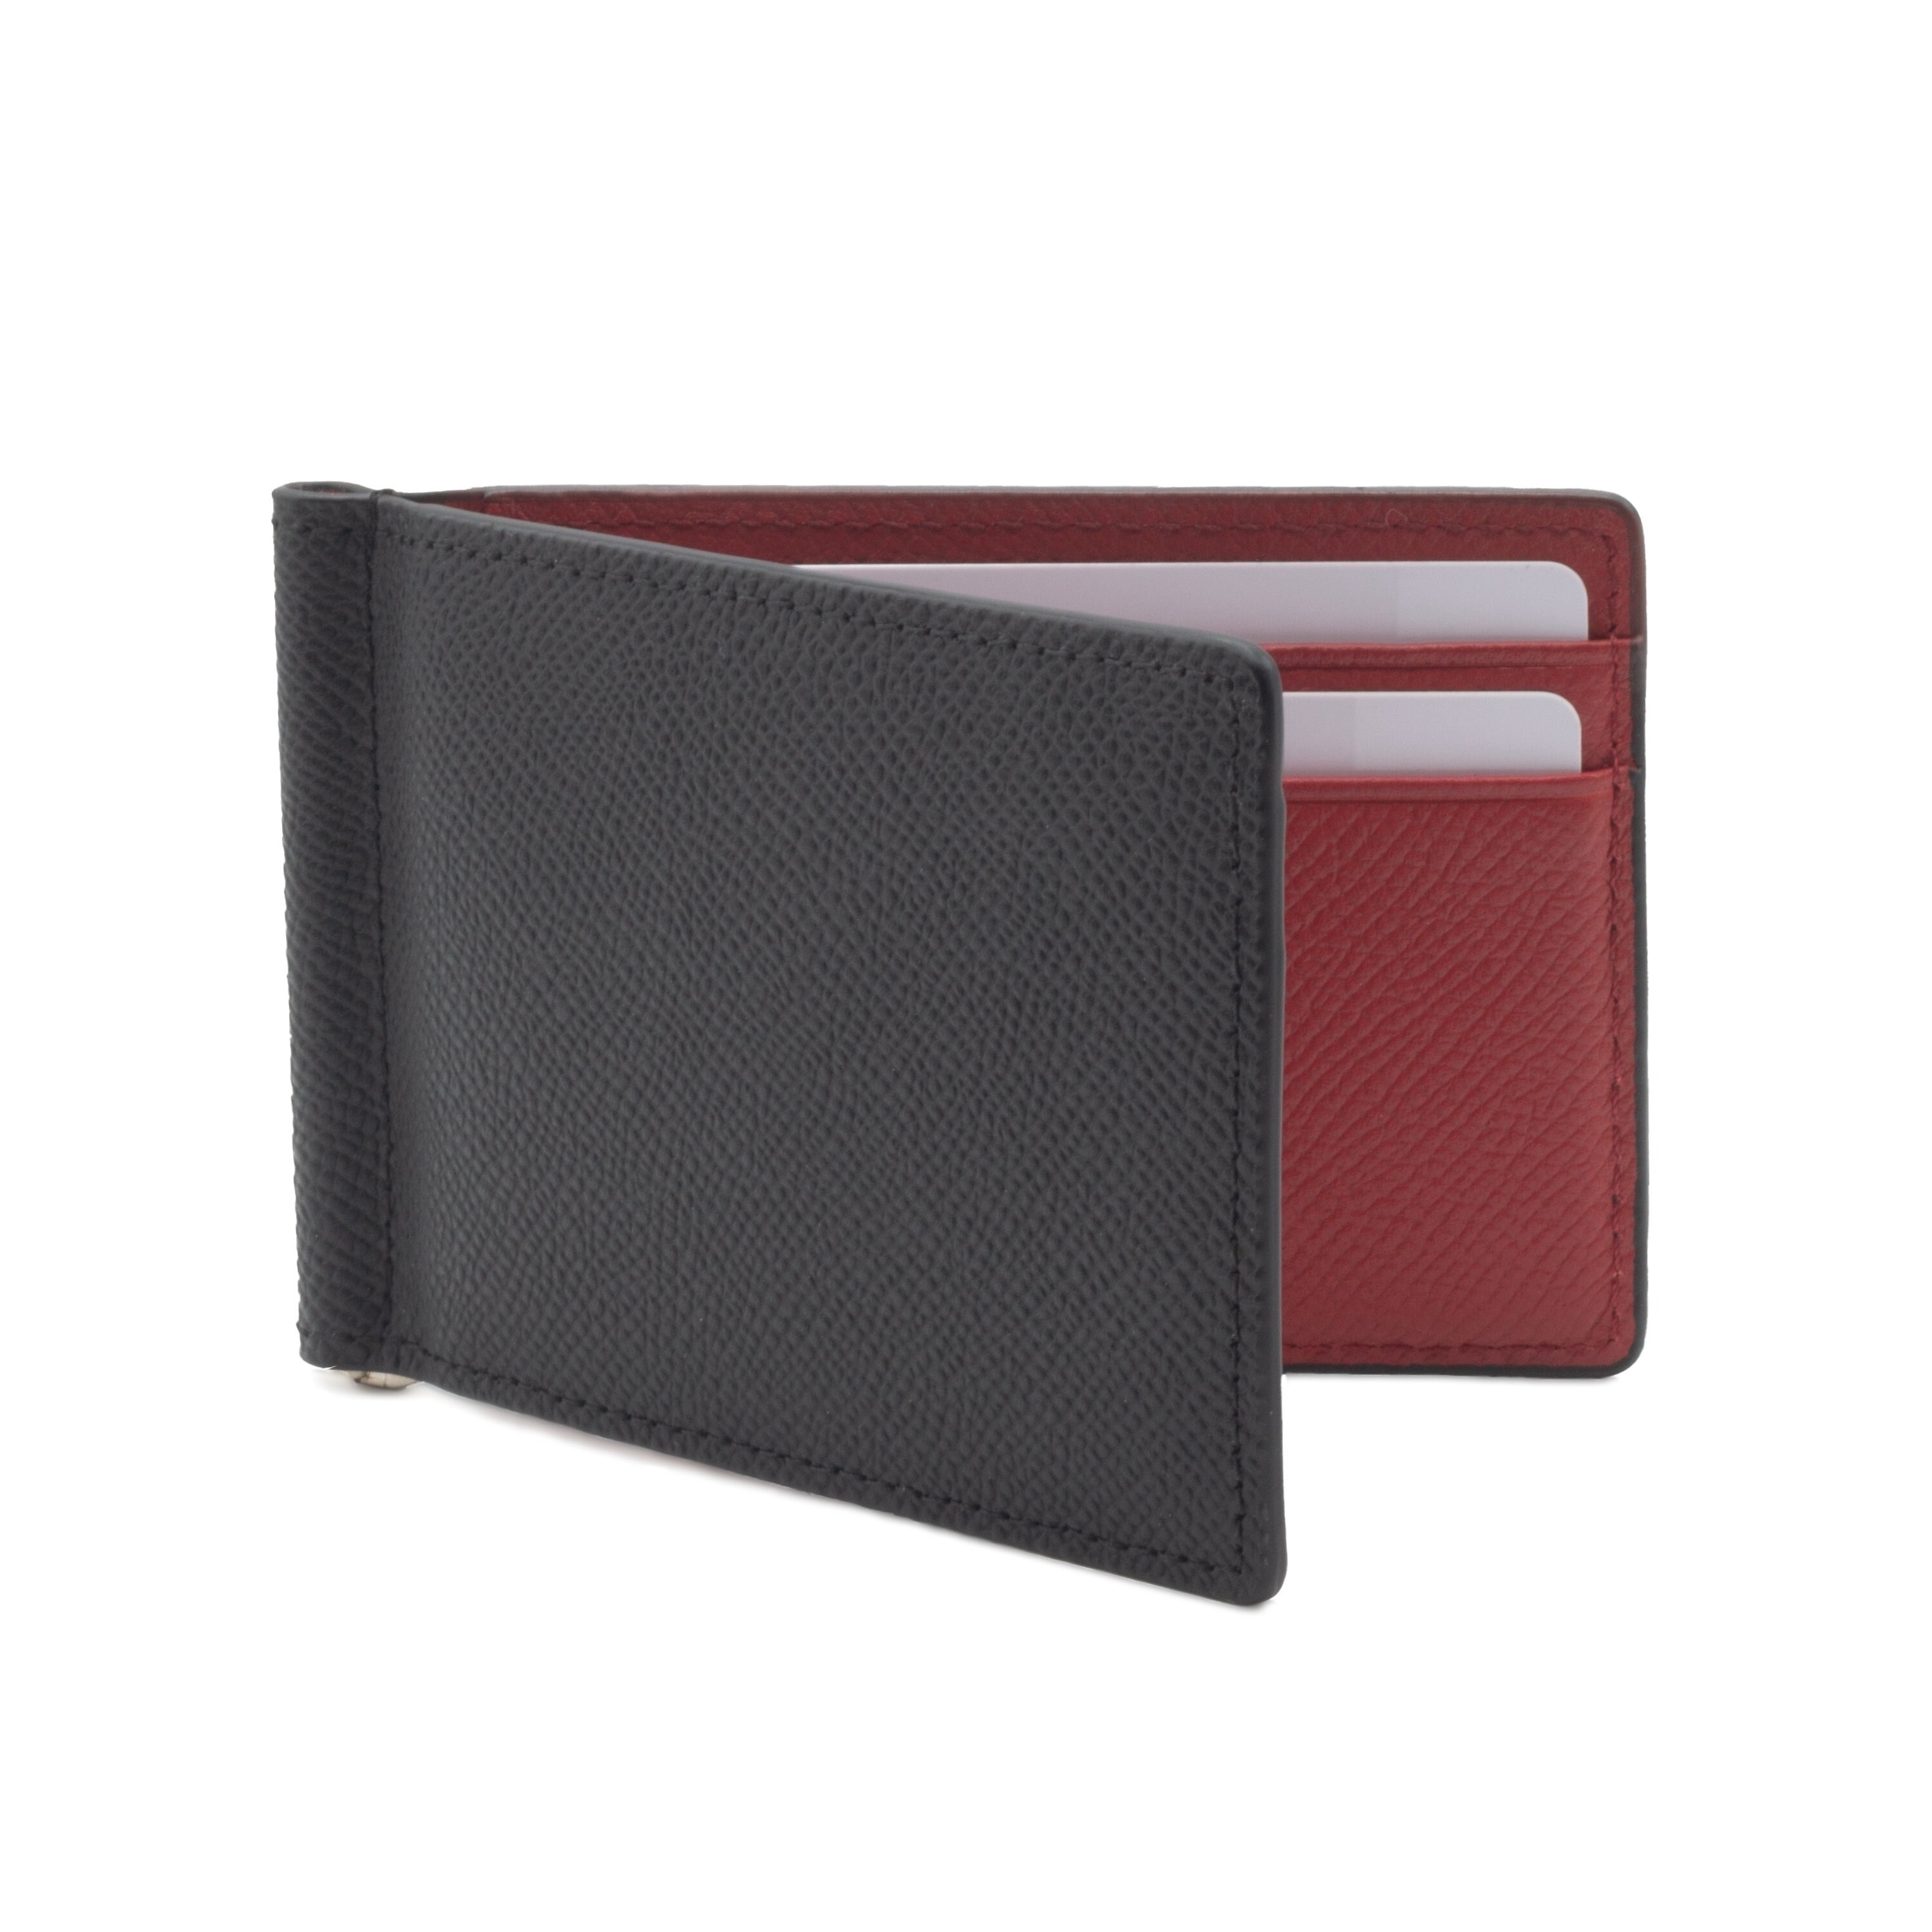 The Tanned Cow Super Slim Bifold Wallet- Genuine Leather Minimalist Front Pocket Wallets for Men with Money Clip, RFID Blocking (Black/Red)